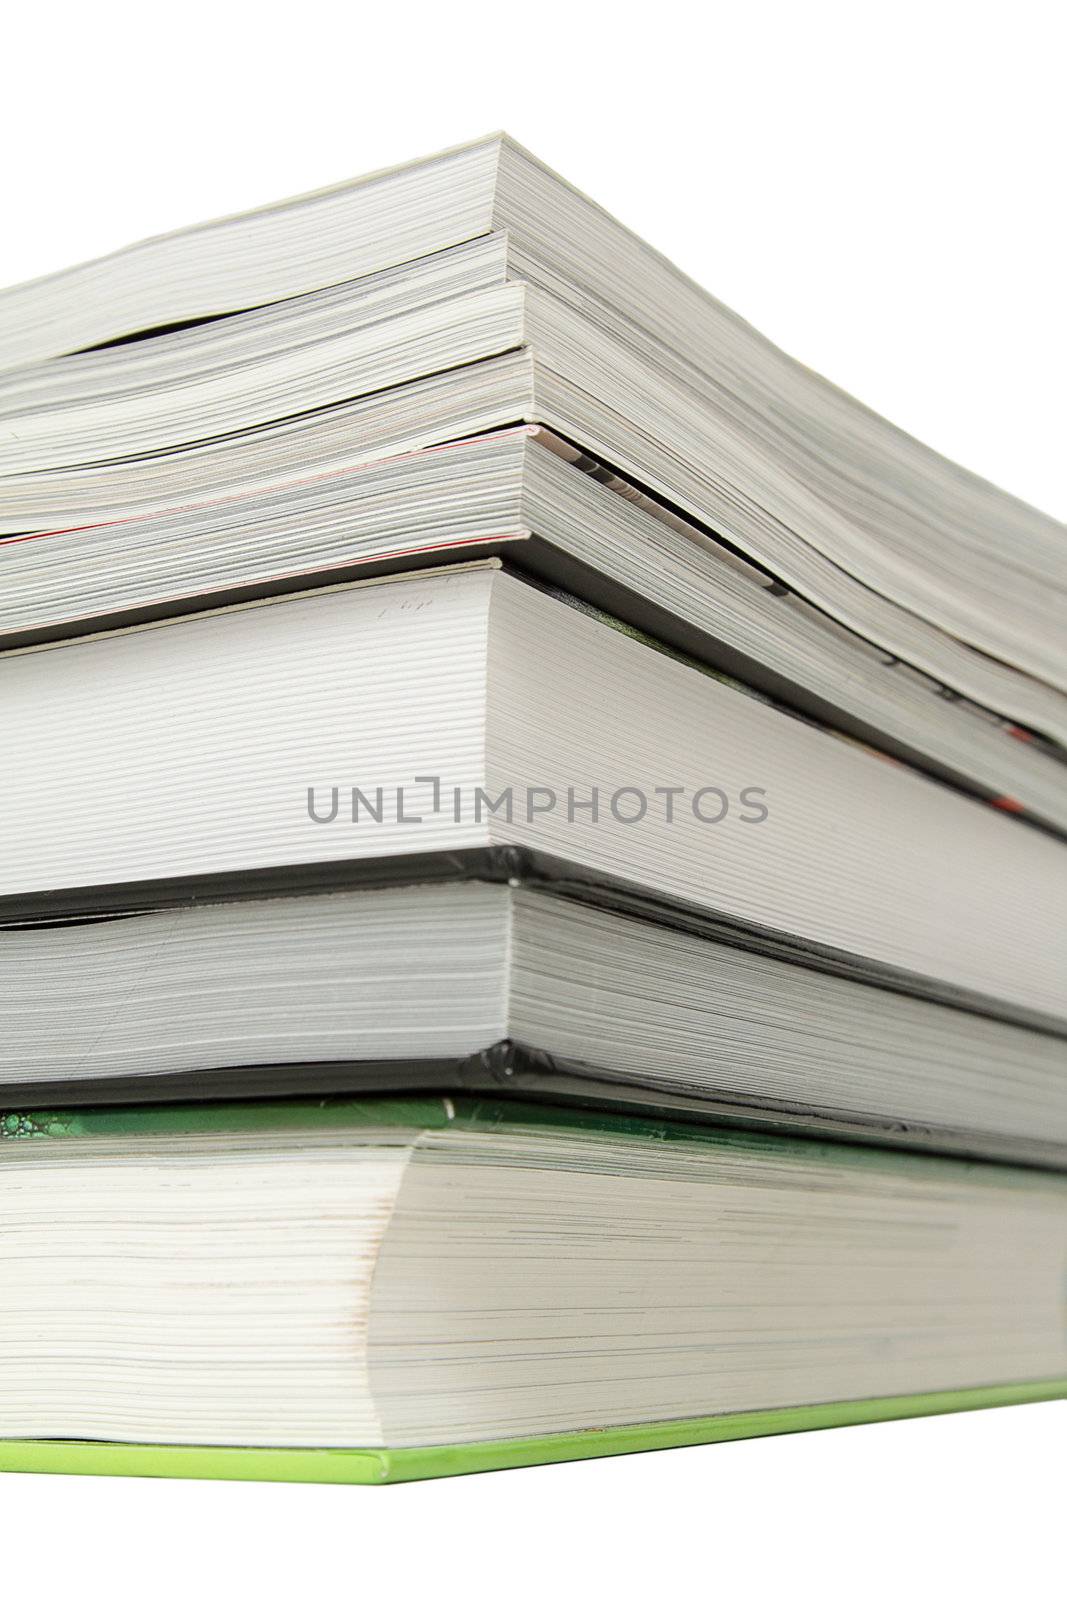 Stack of several books over white background